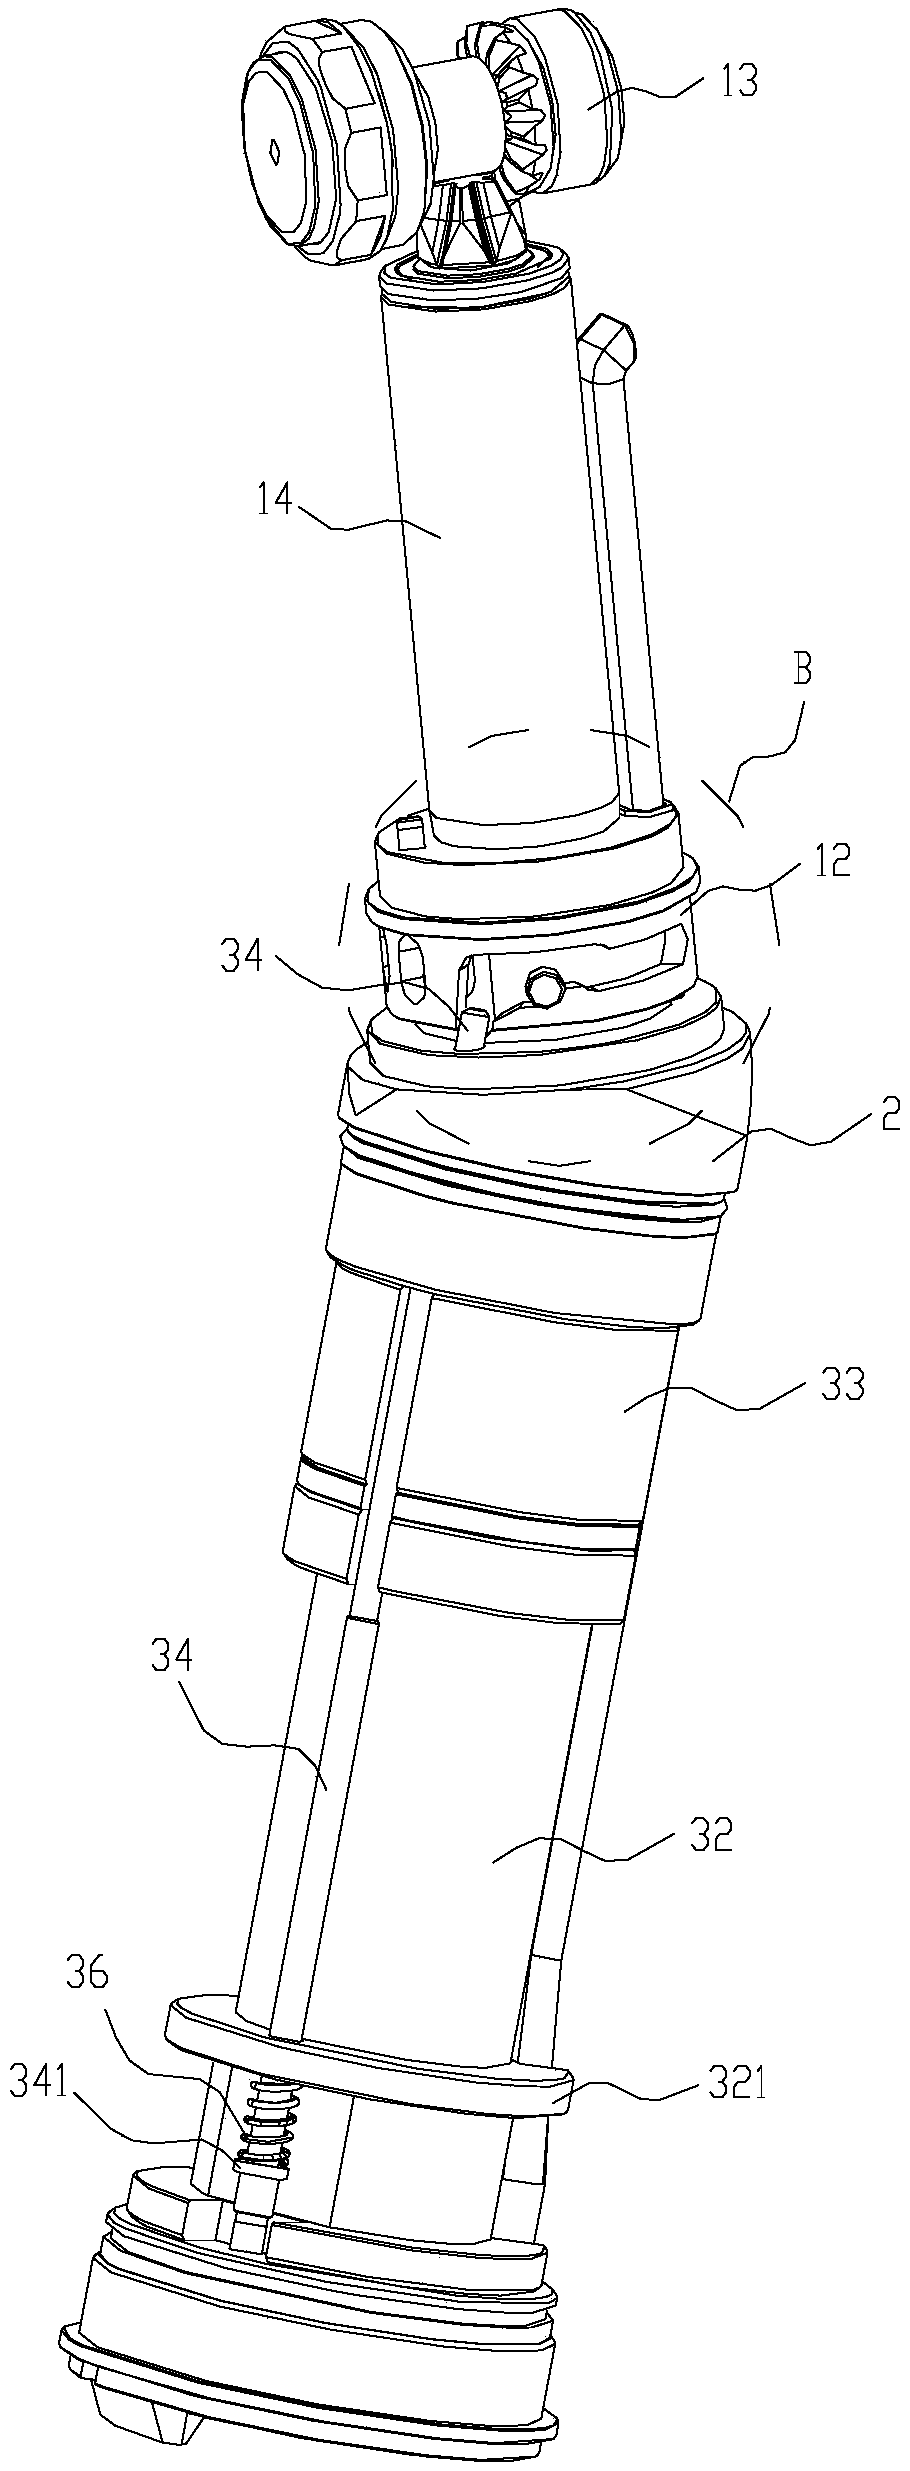 A detachable dental handpiece with anti-loosening safety device